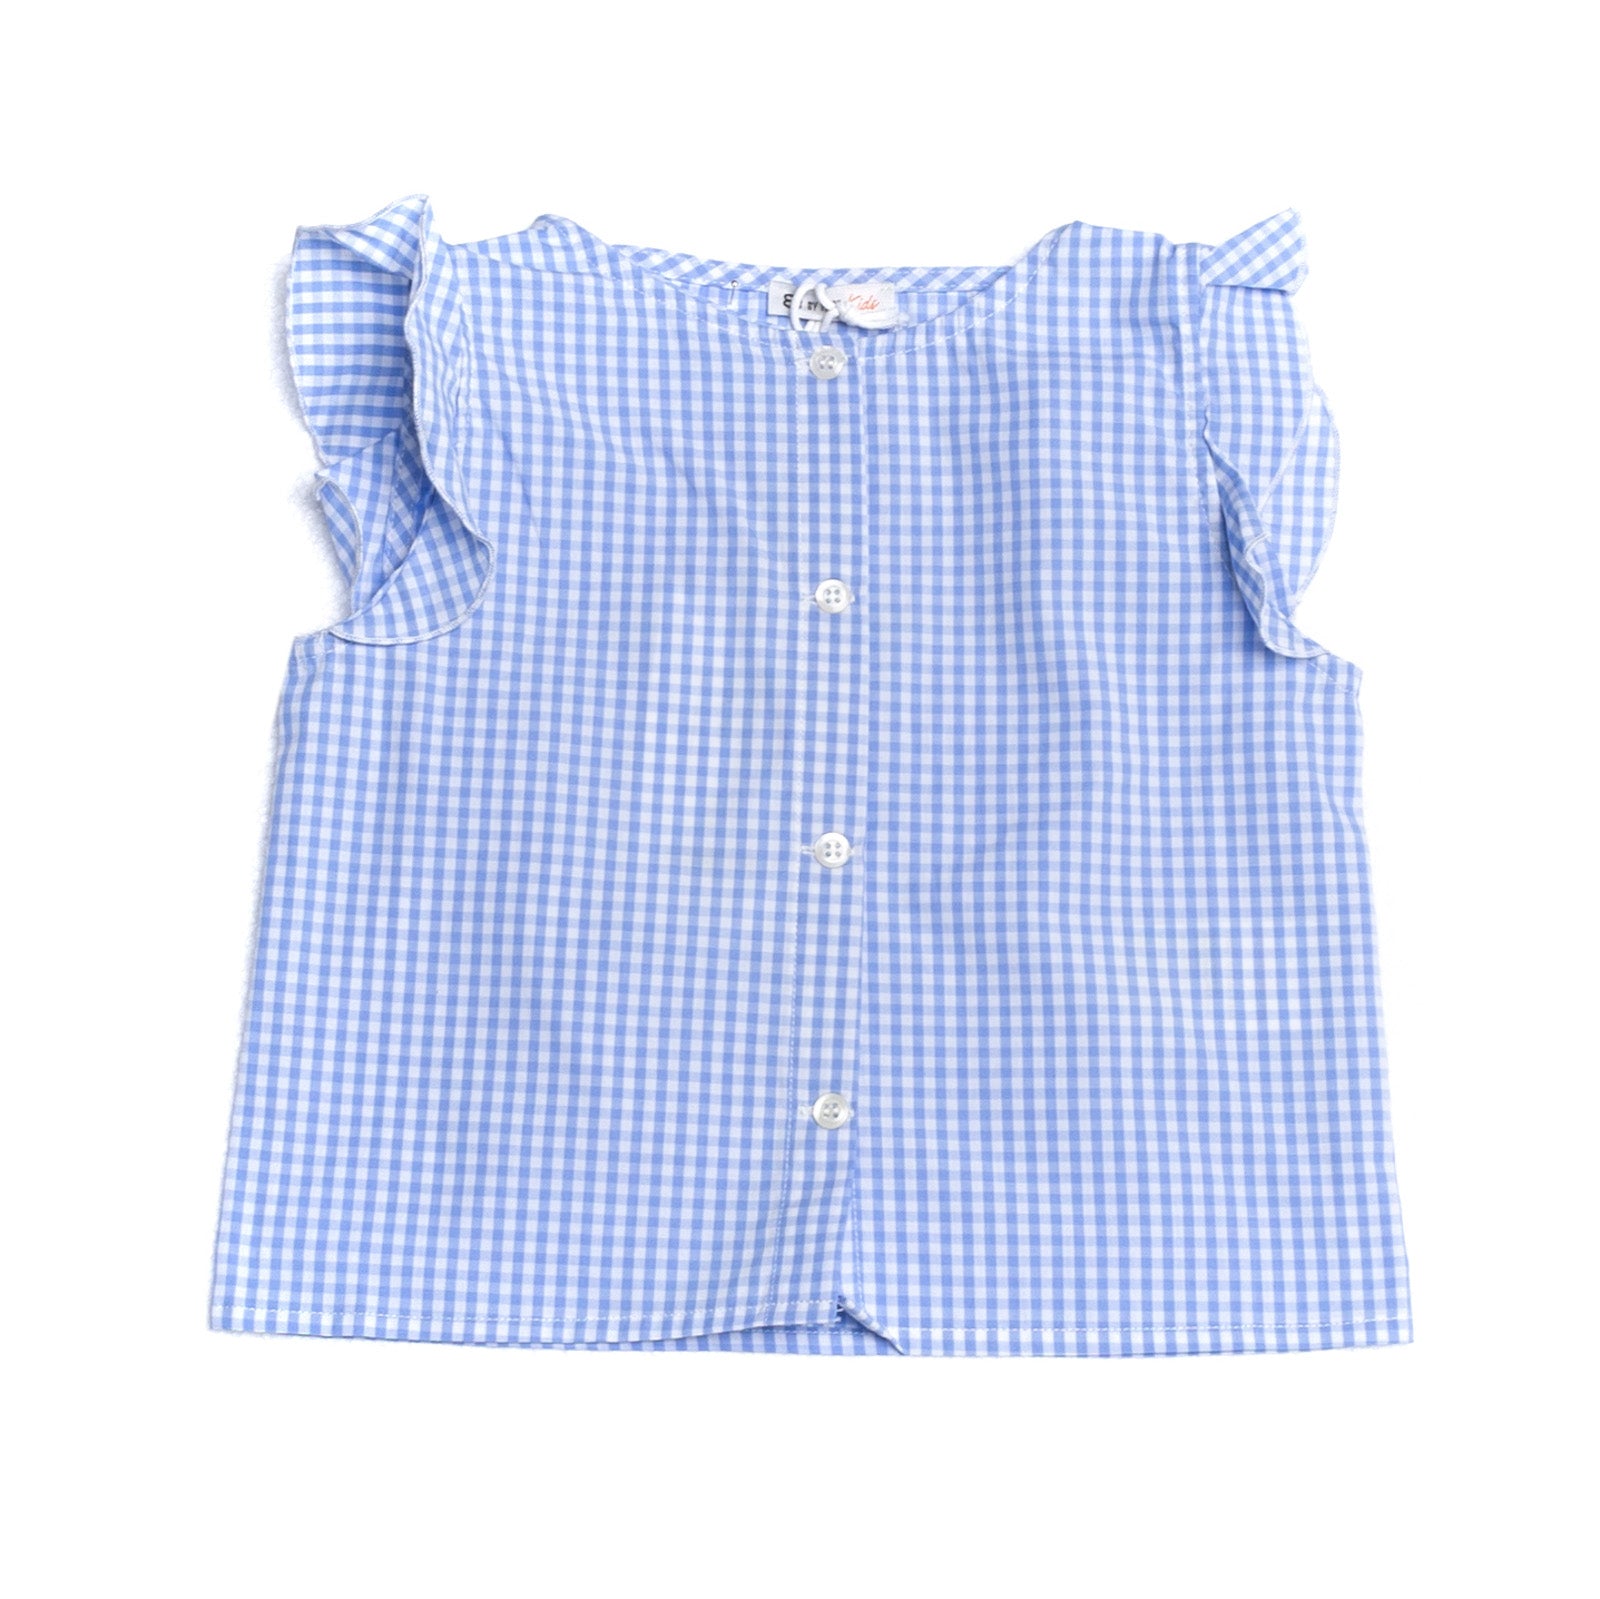 8 KIDS Top Blouse Size 4Y Gingham Pattern Ruffle Trim Made in Italy gallery main photo